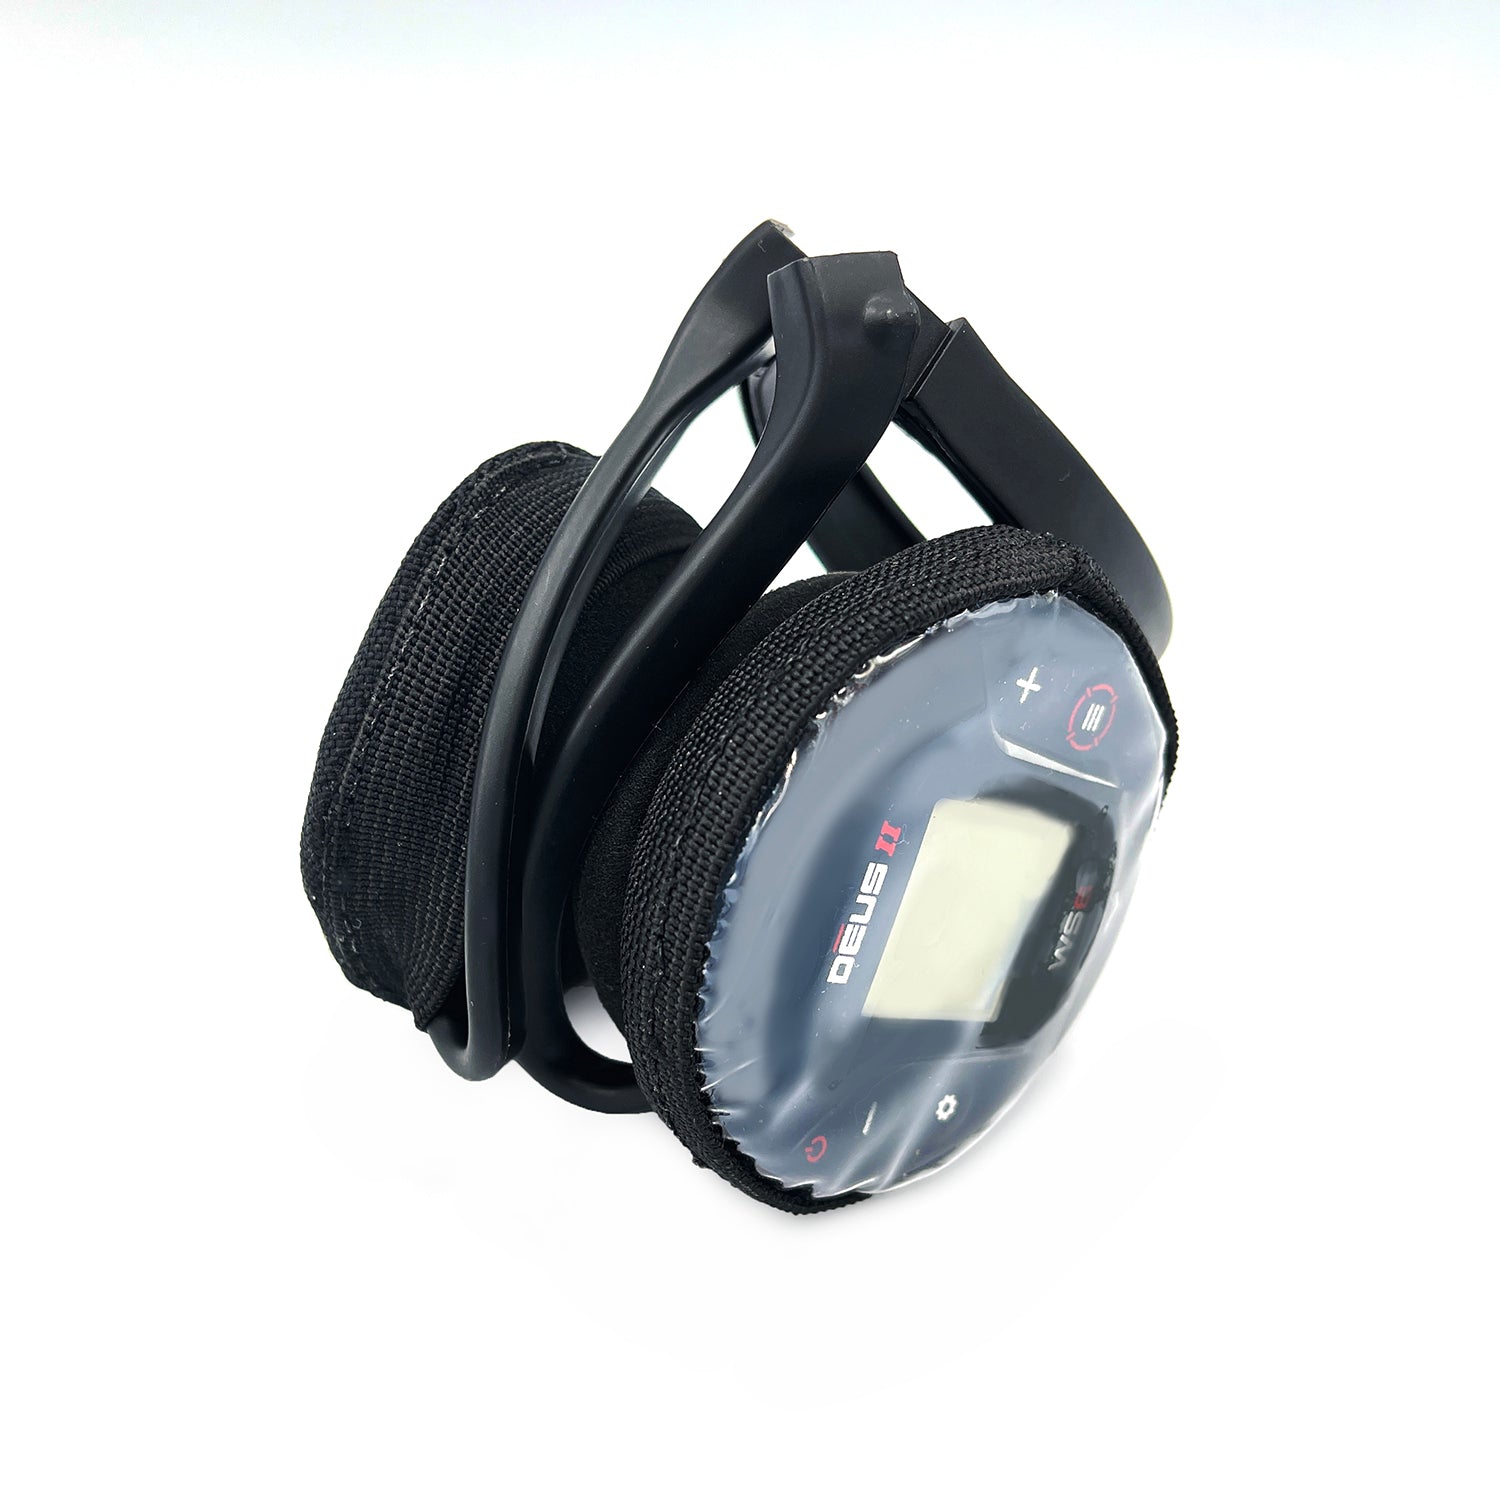 Searcher WS4/6 headphone covers